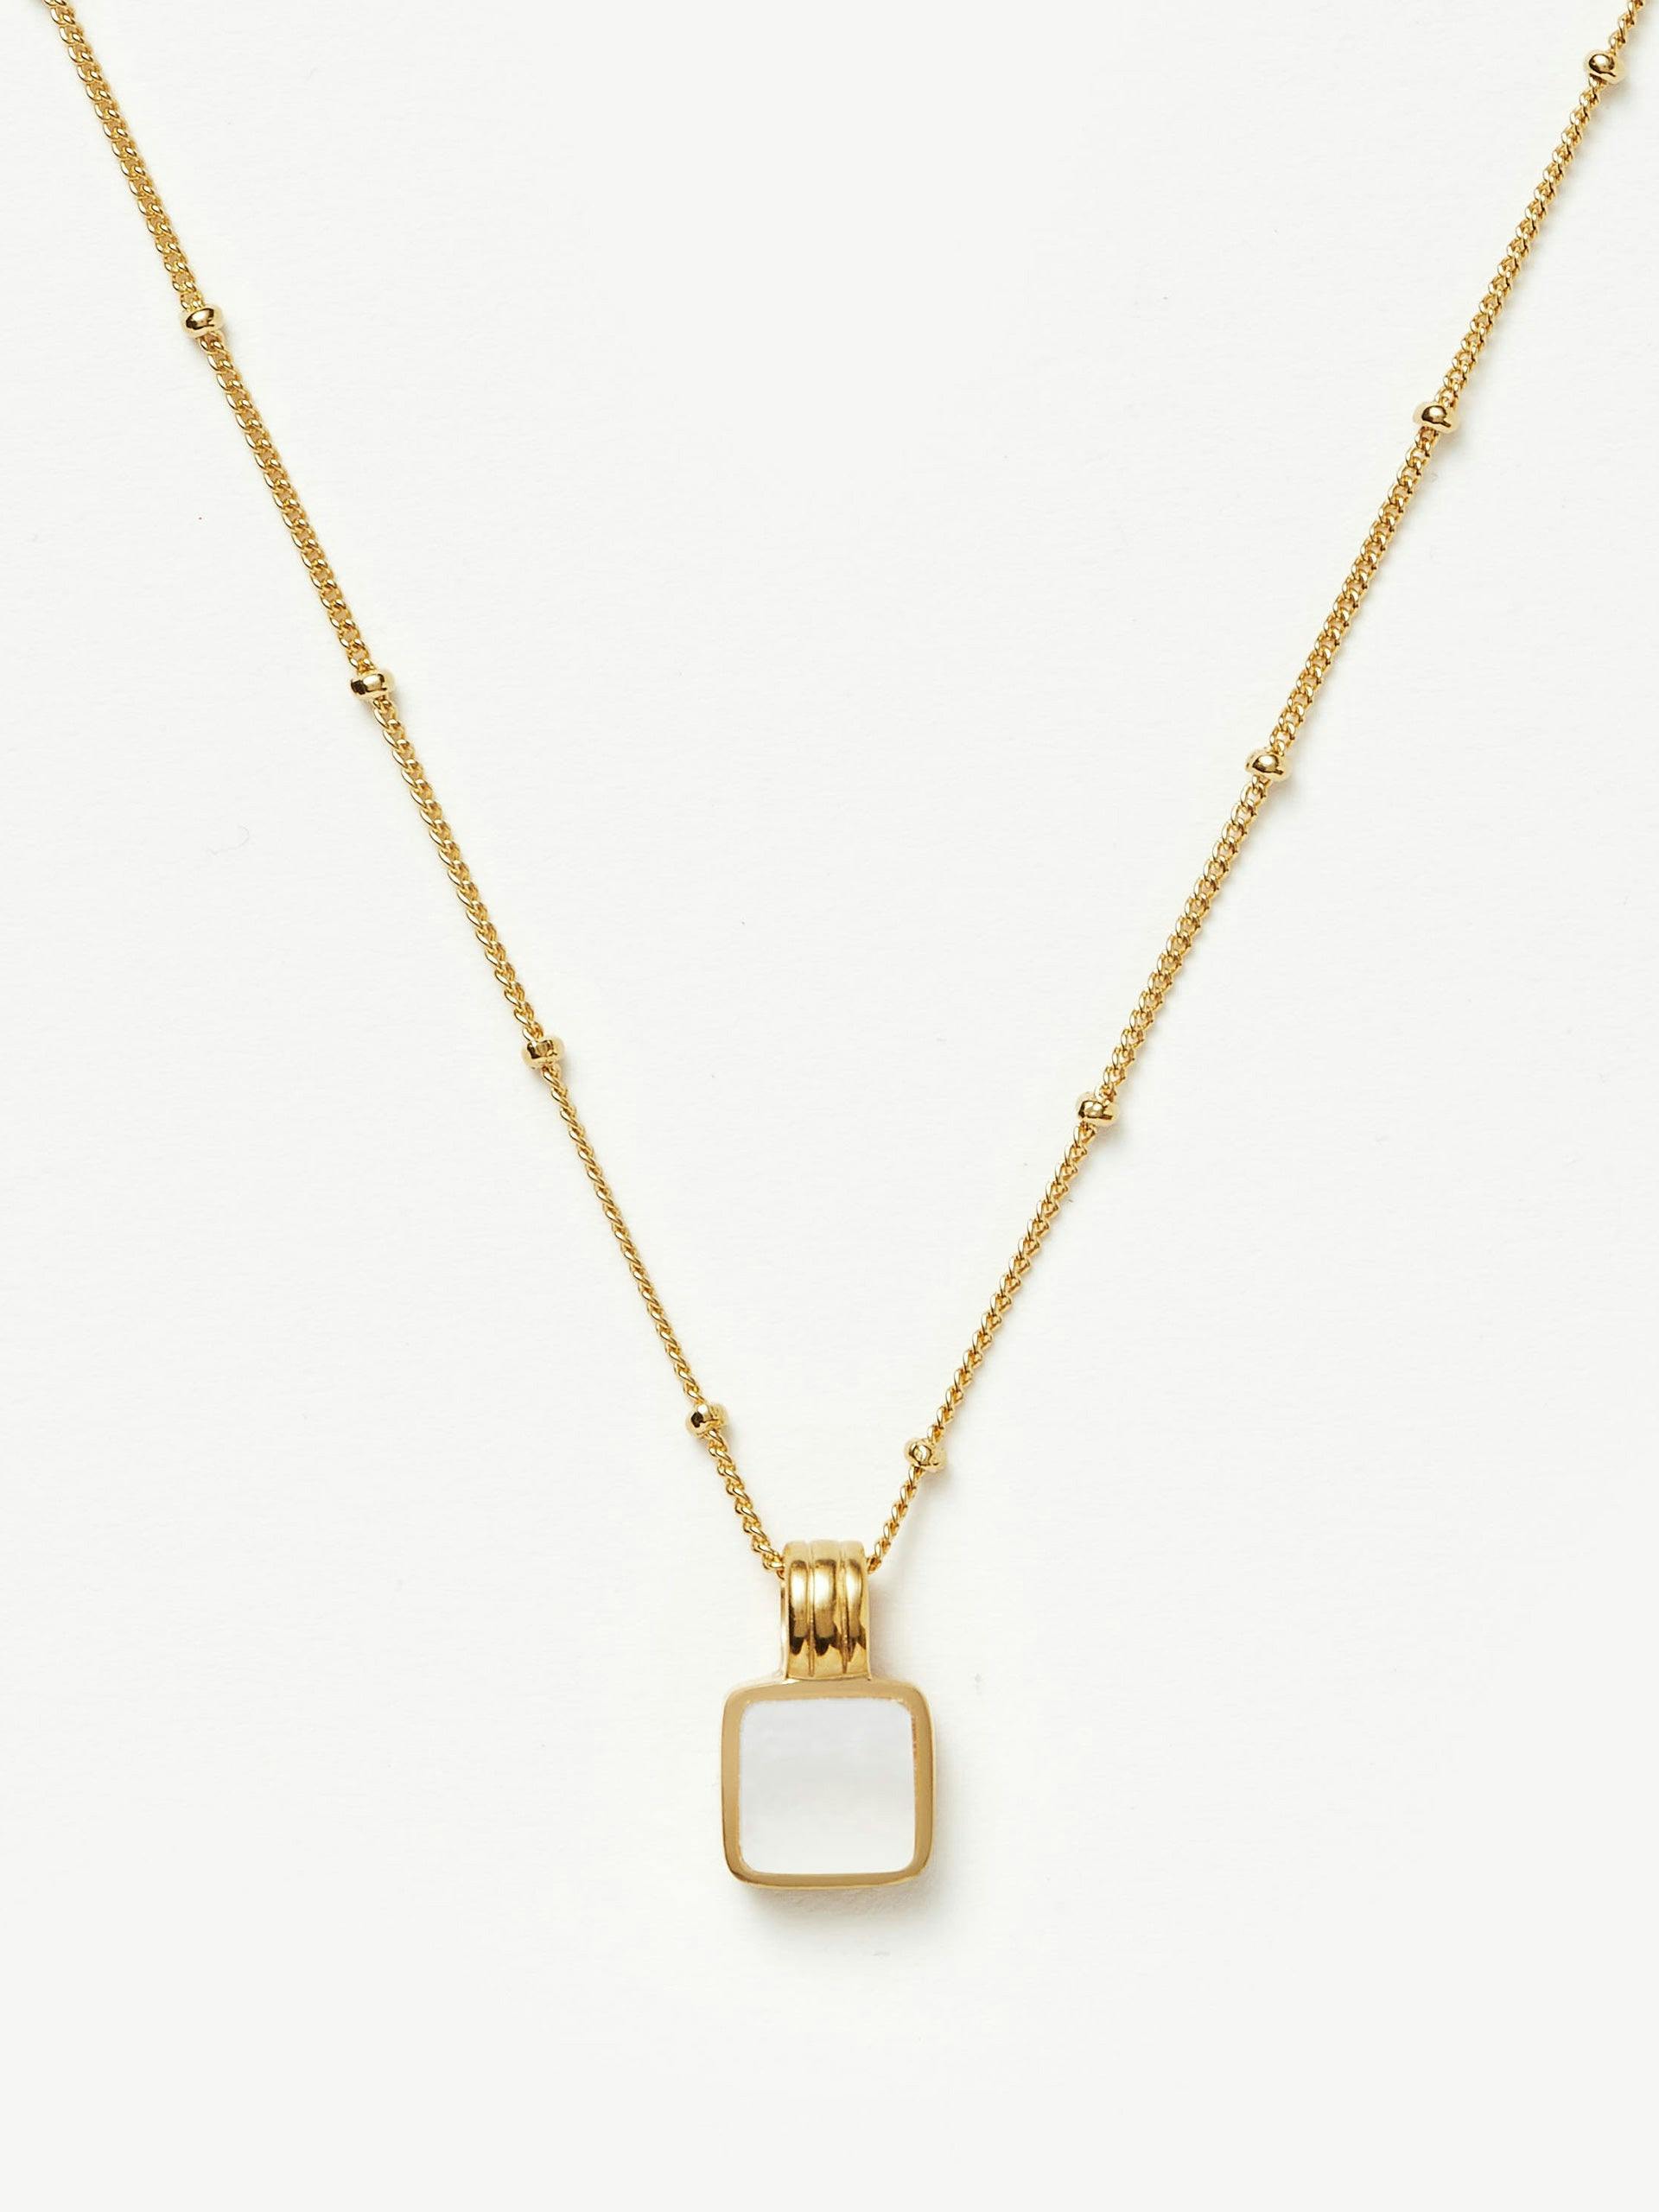 Lucy Williams square mother of pearl necklace